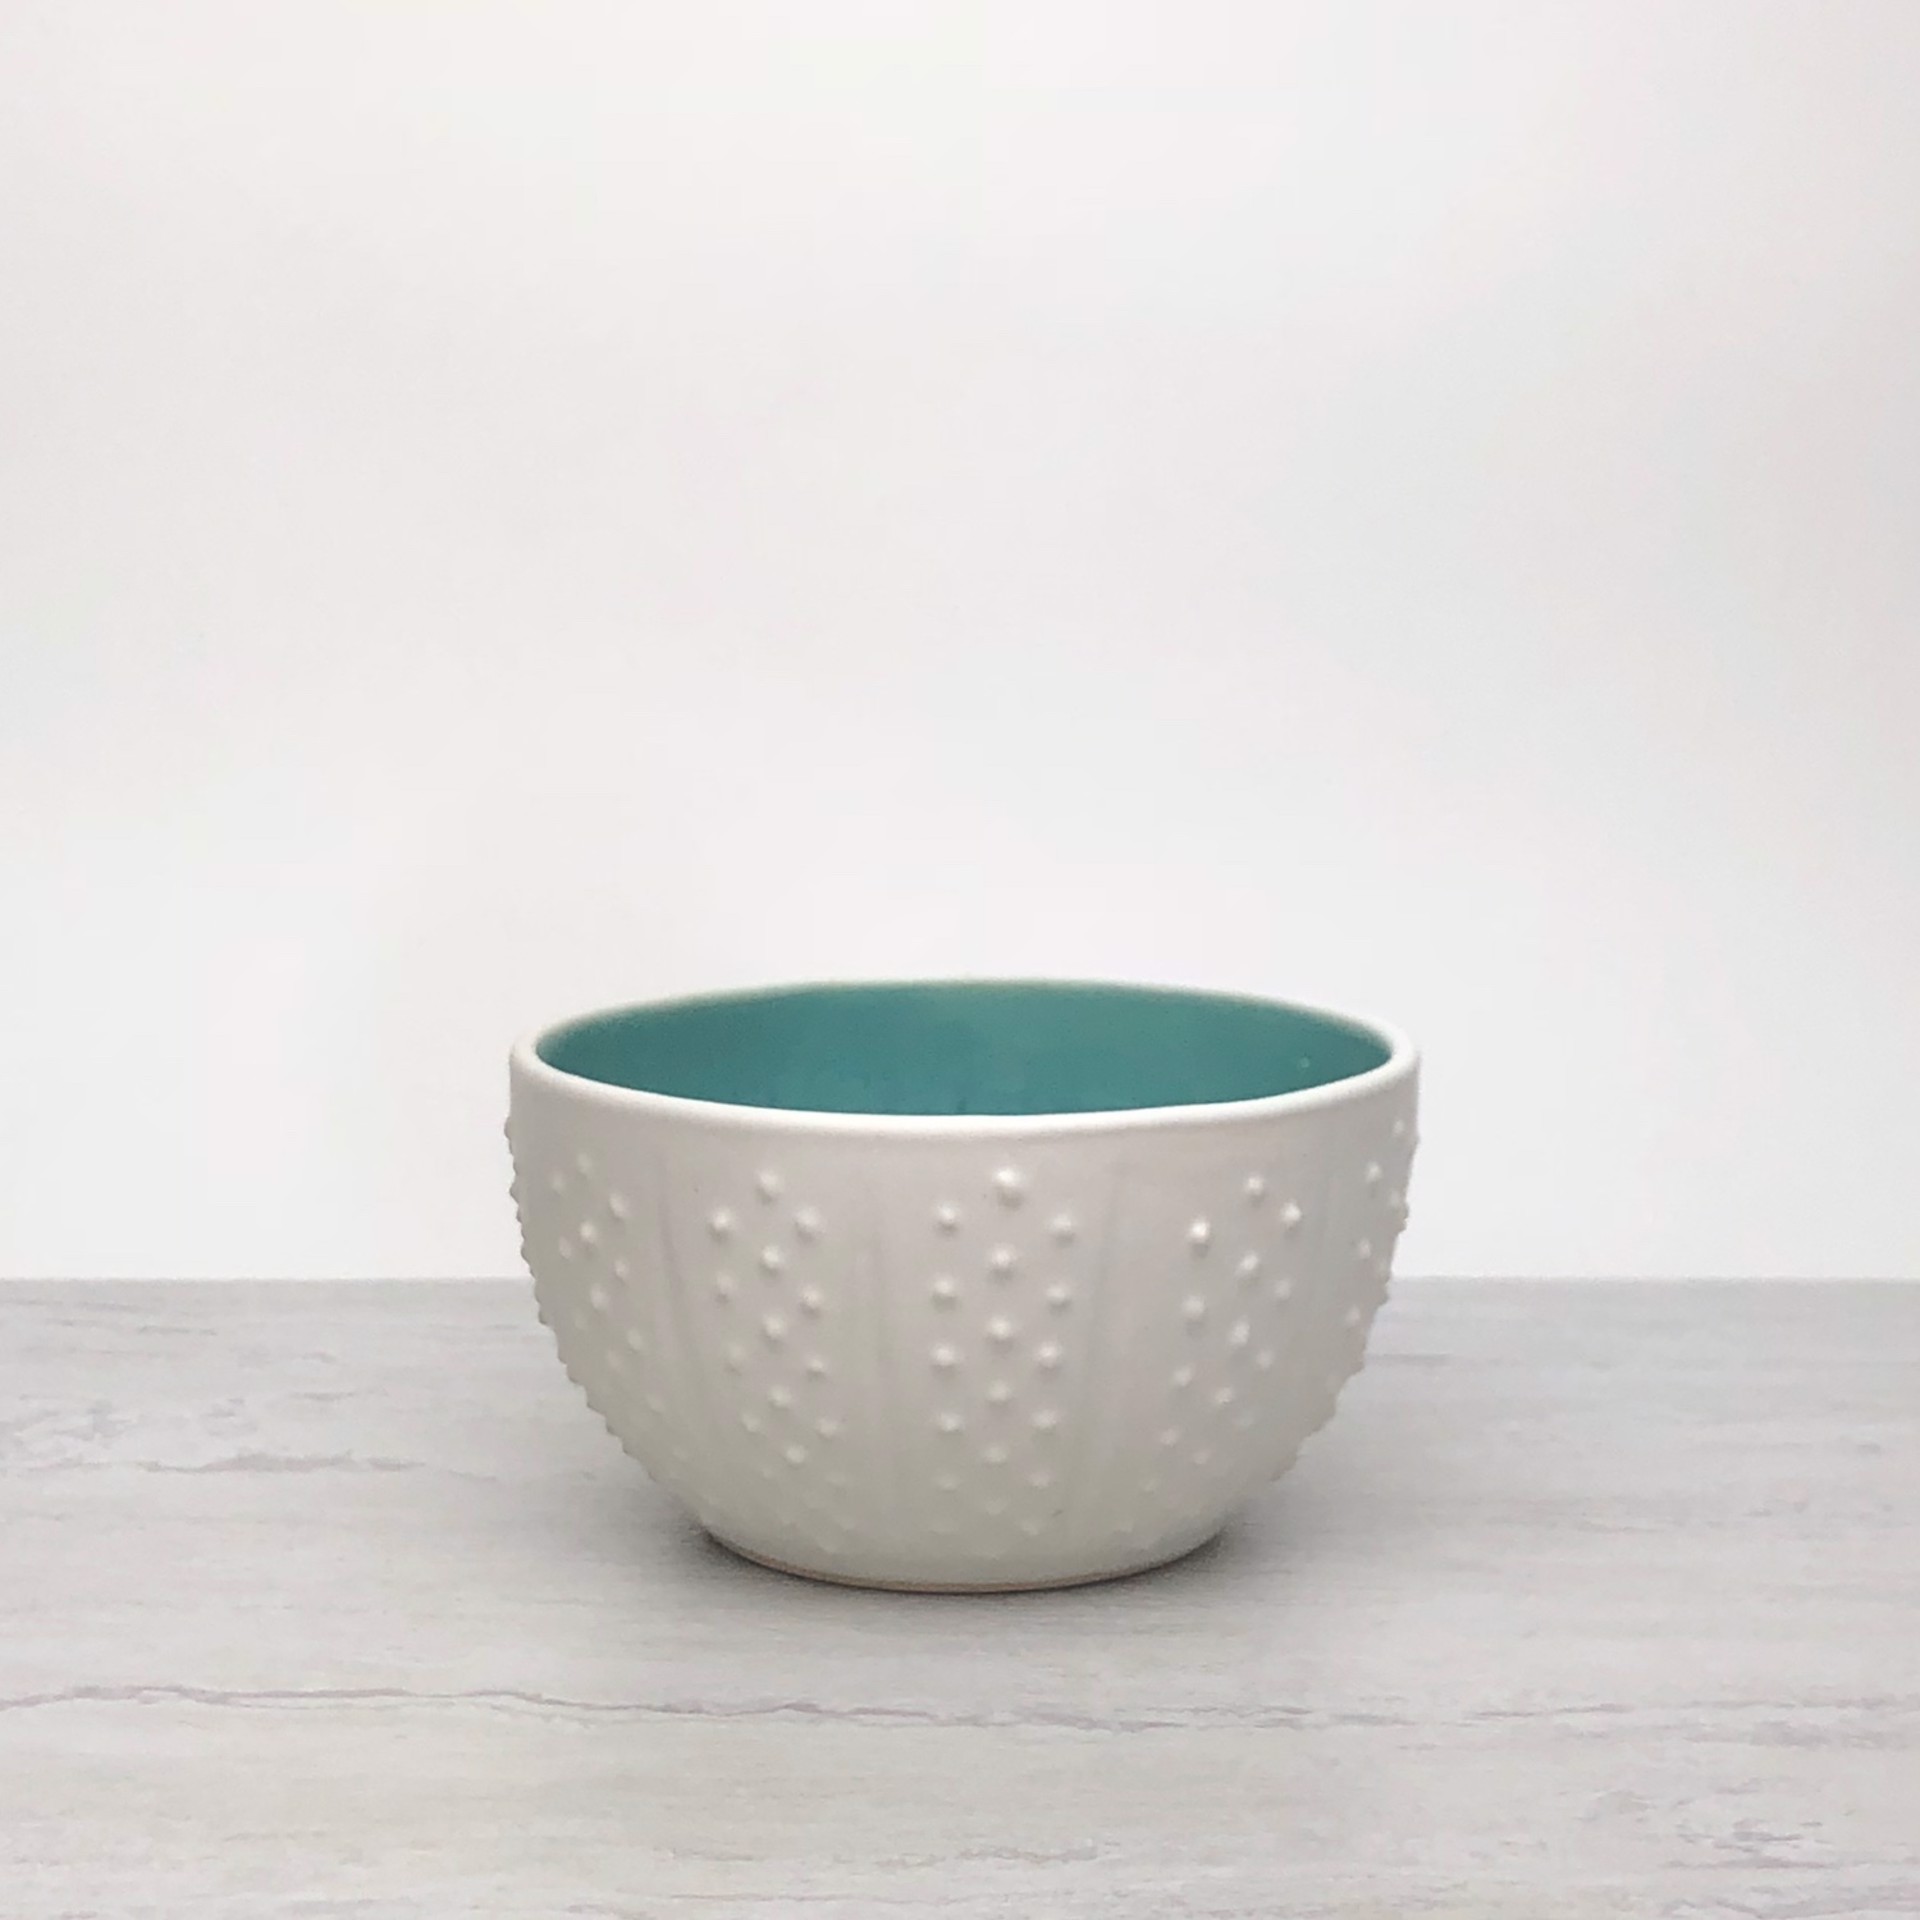 #22 urchin cereal bowl by Leah Streetman